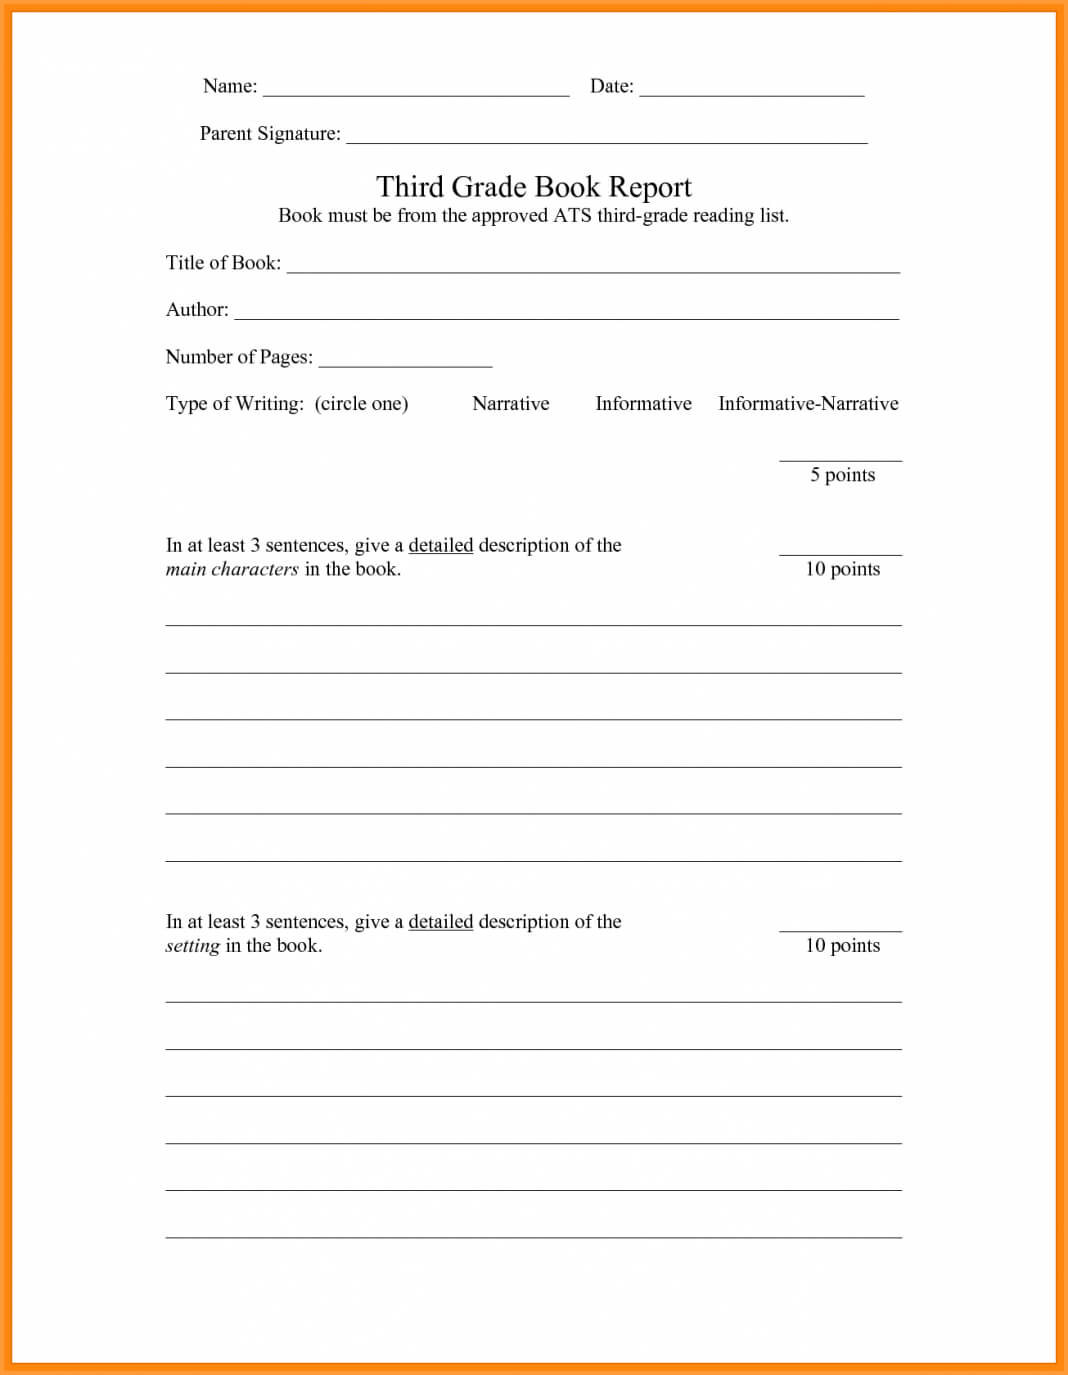 Third Grade Book Port Examples Free Printable 3Rd Form Pertaining To Book Report Template 3Rd Grade